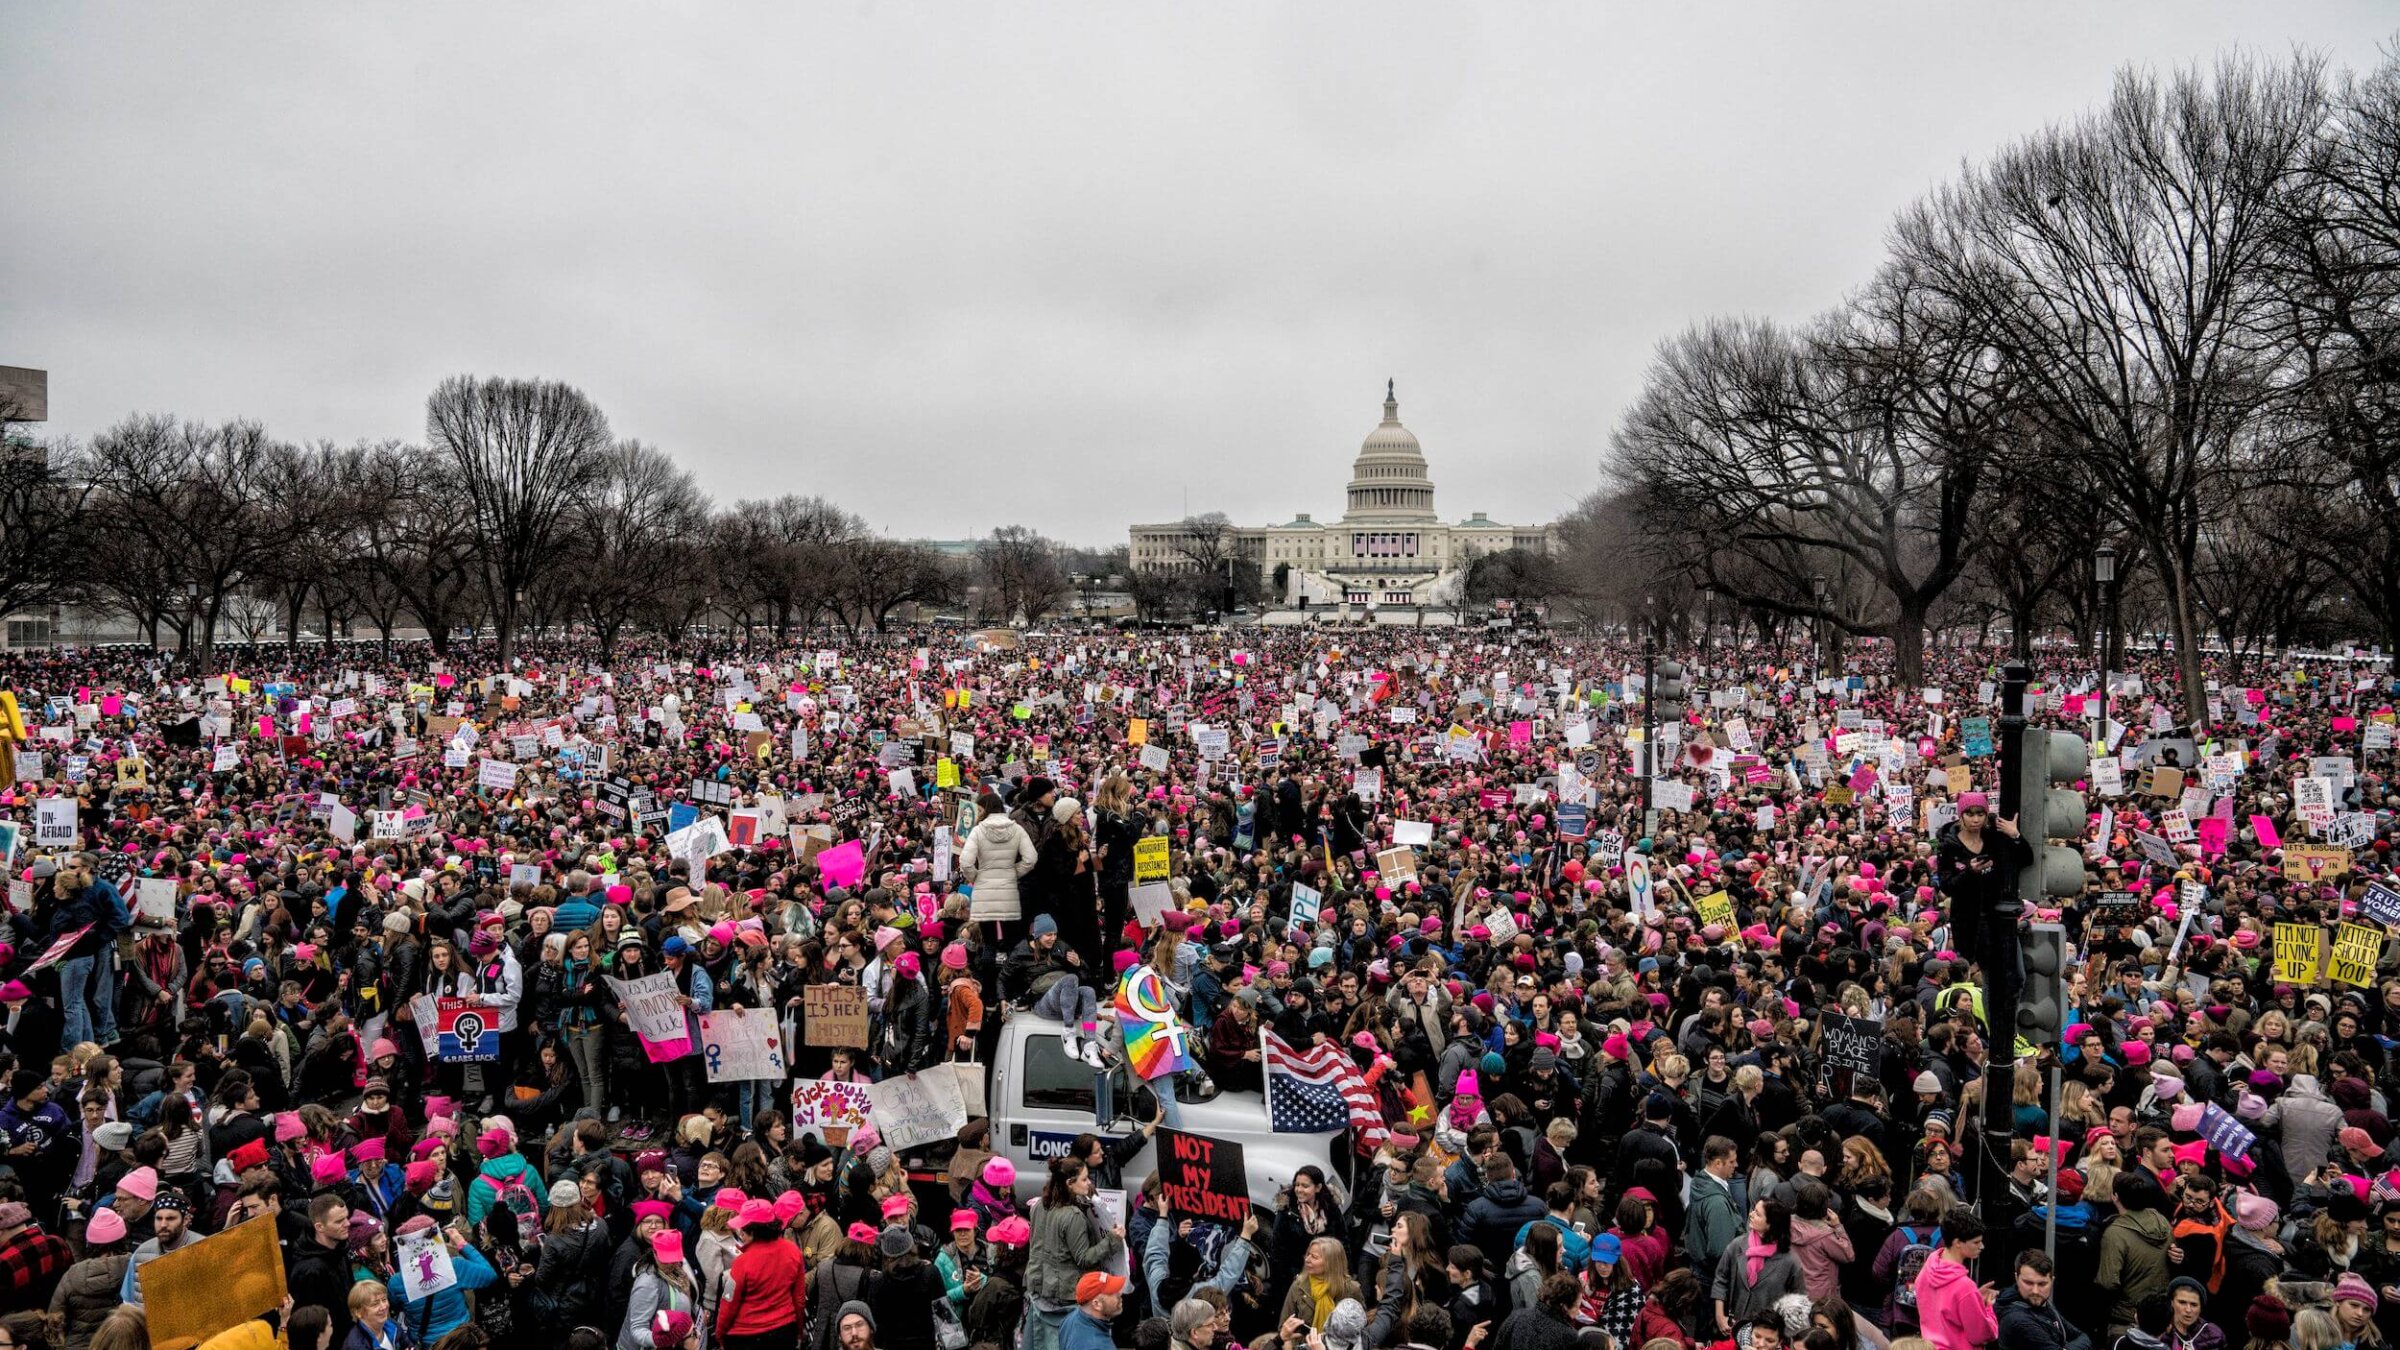 The 2017 Women's March on Washington, the day after Donald J. Trump's inauguration as president of the United States, might have helped set the stage for Trump's defeat in 2020.